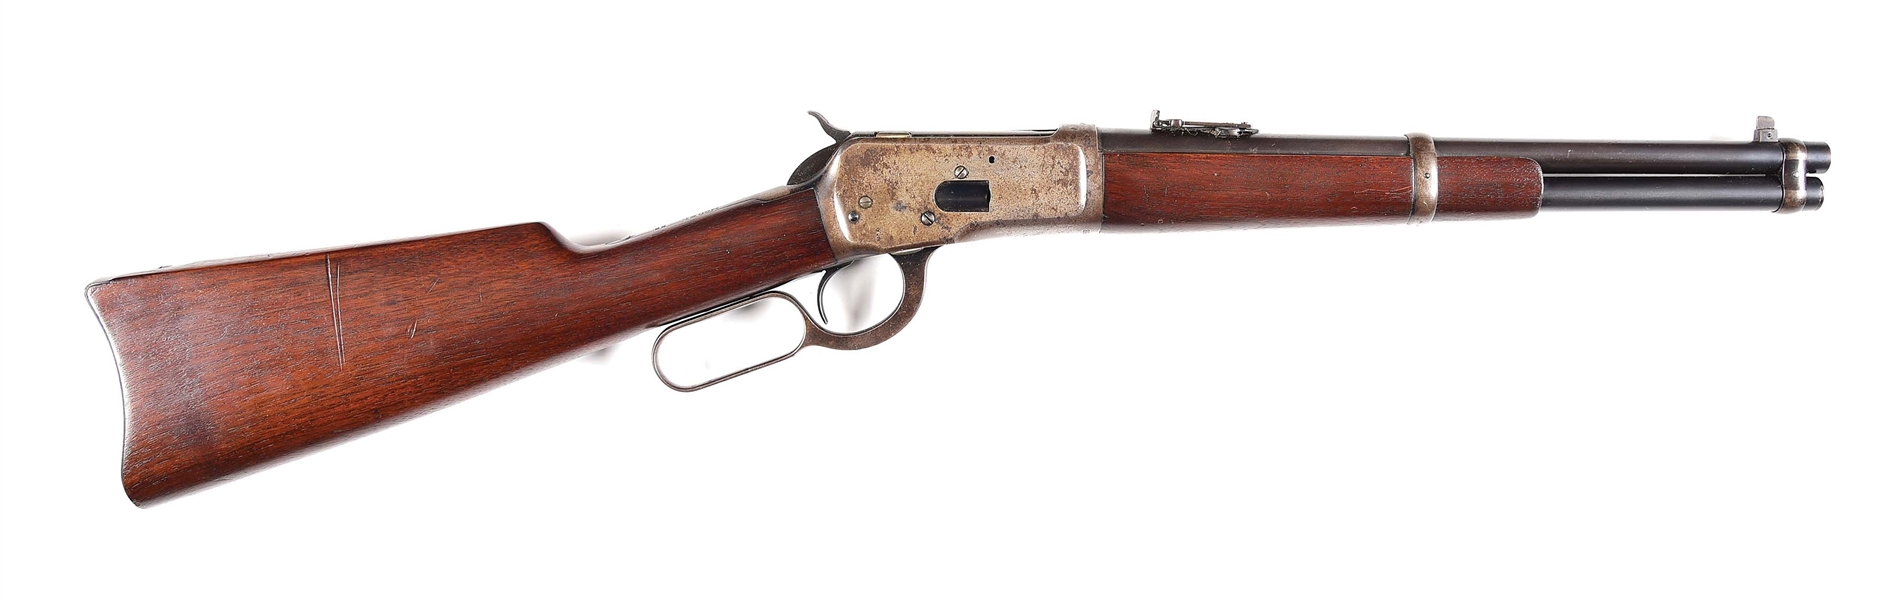 (C) WINCHESTER MODEL 1892 TRAPPER LEVER ACTION CARBINE WITH ATF EXEMPTION LETTER (1920).